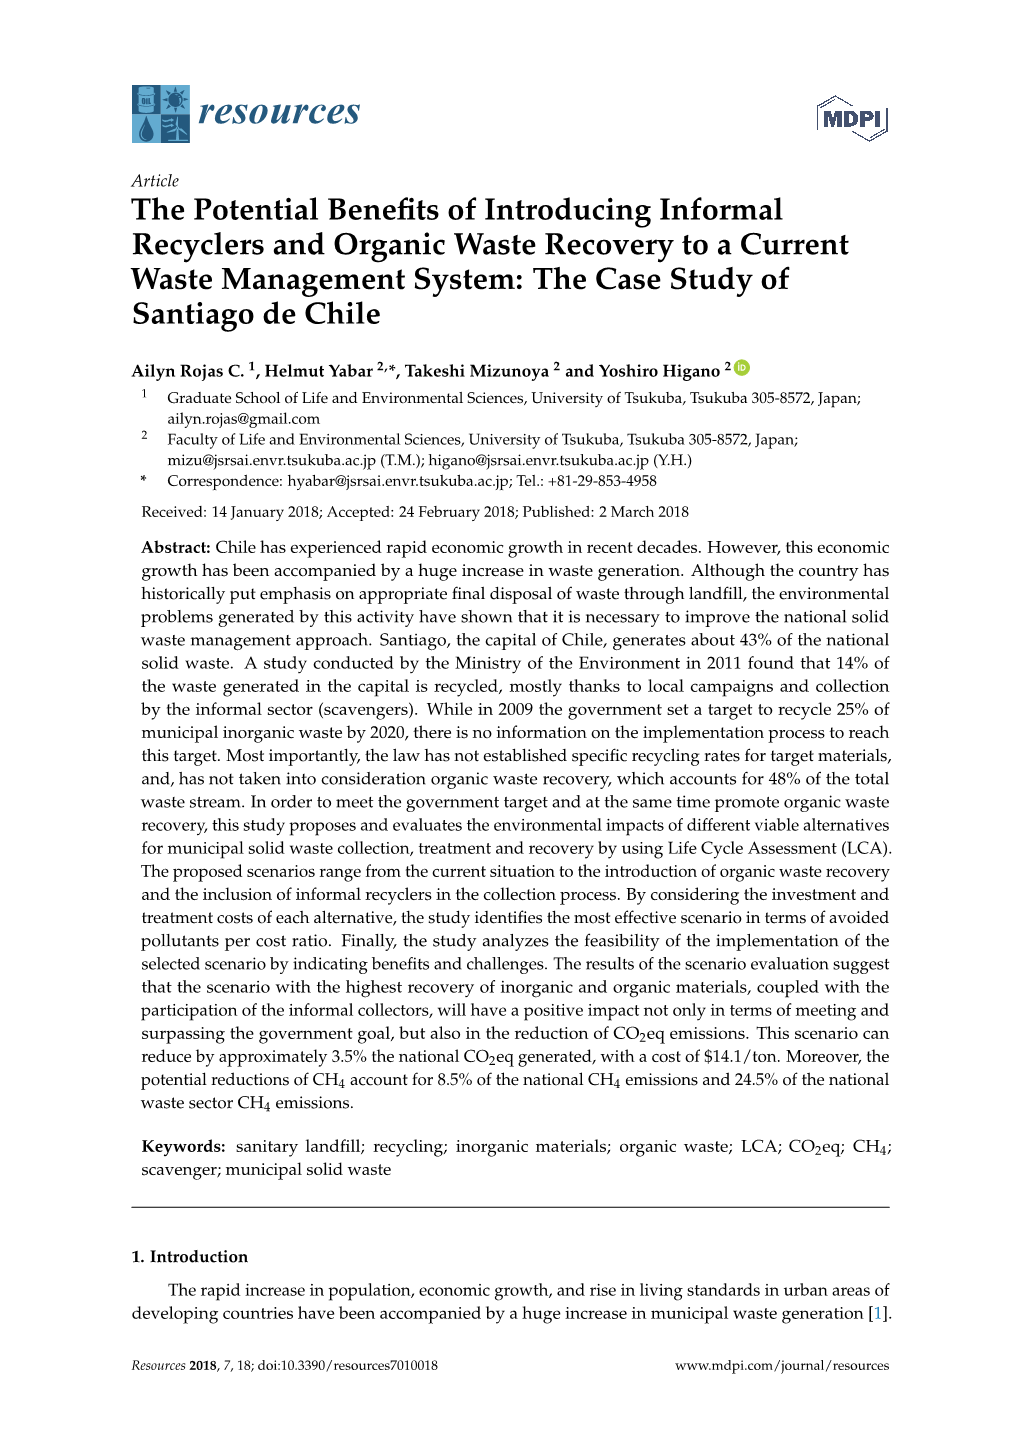 The Potential Benefits of Introducing Informal Recyclers and Organic Waste Recovery to a Current Waste Management System